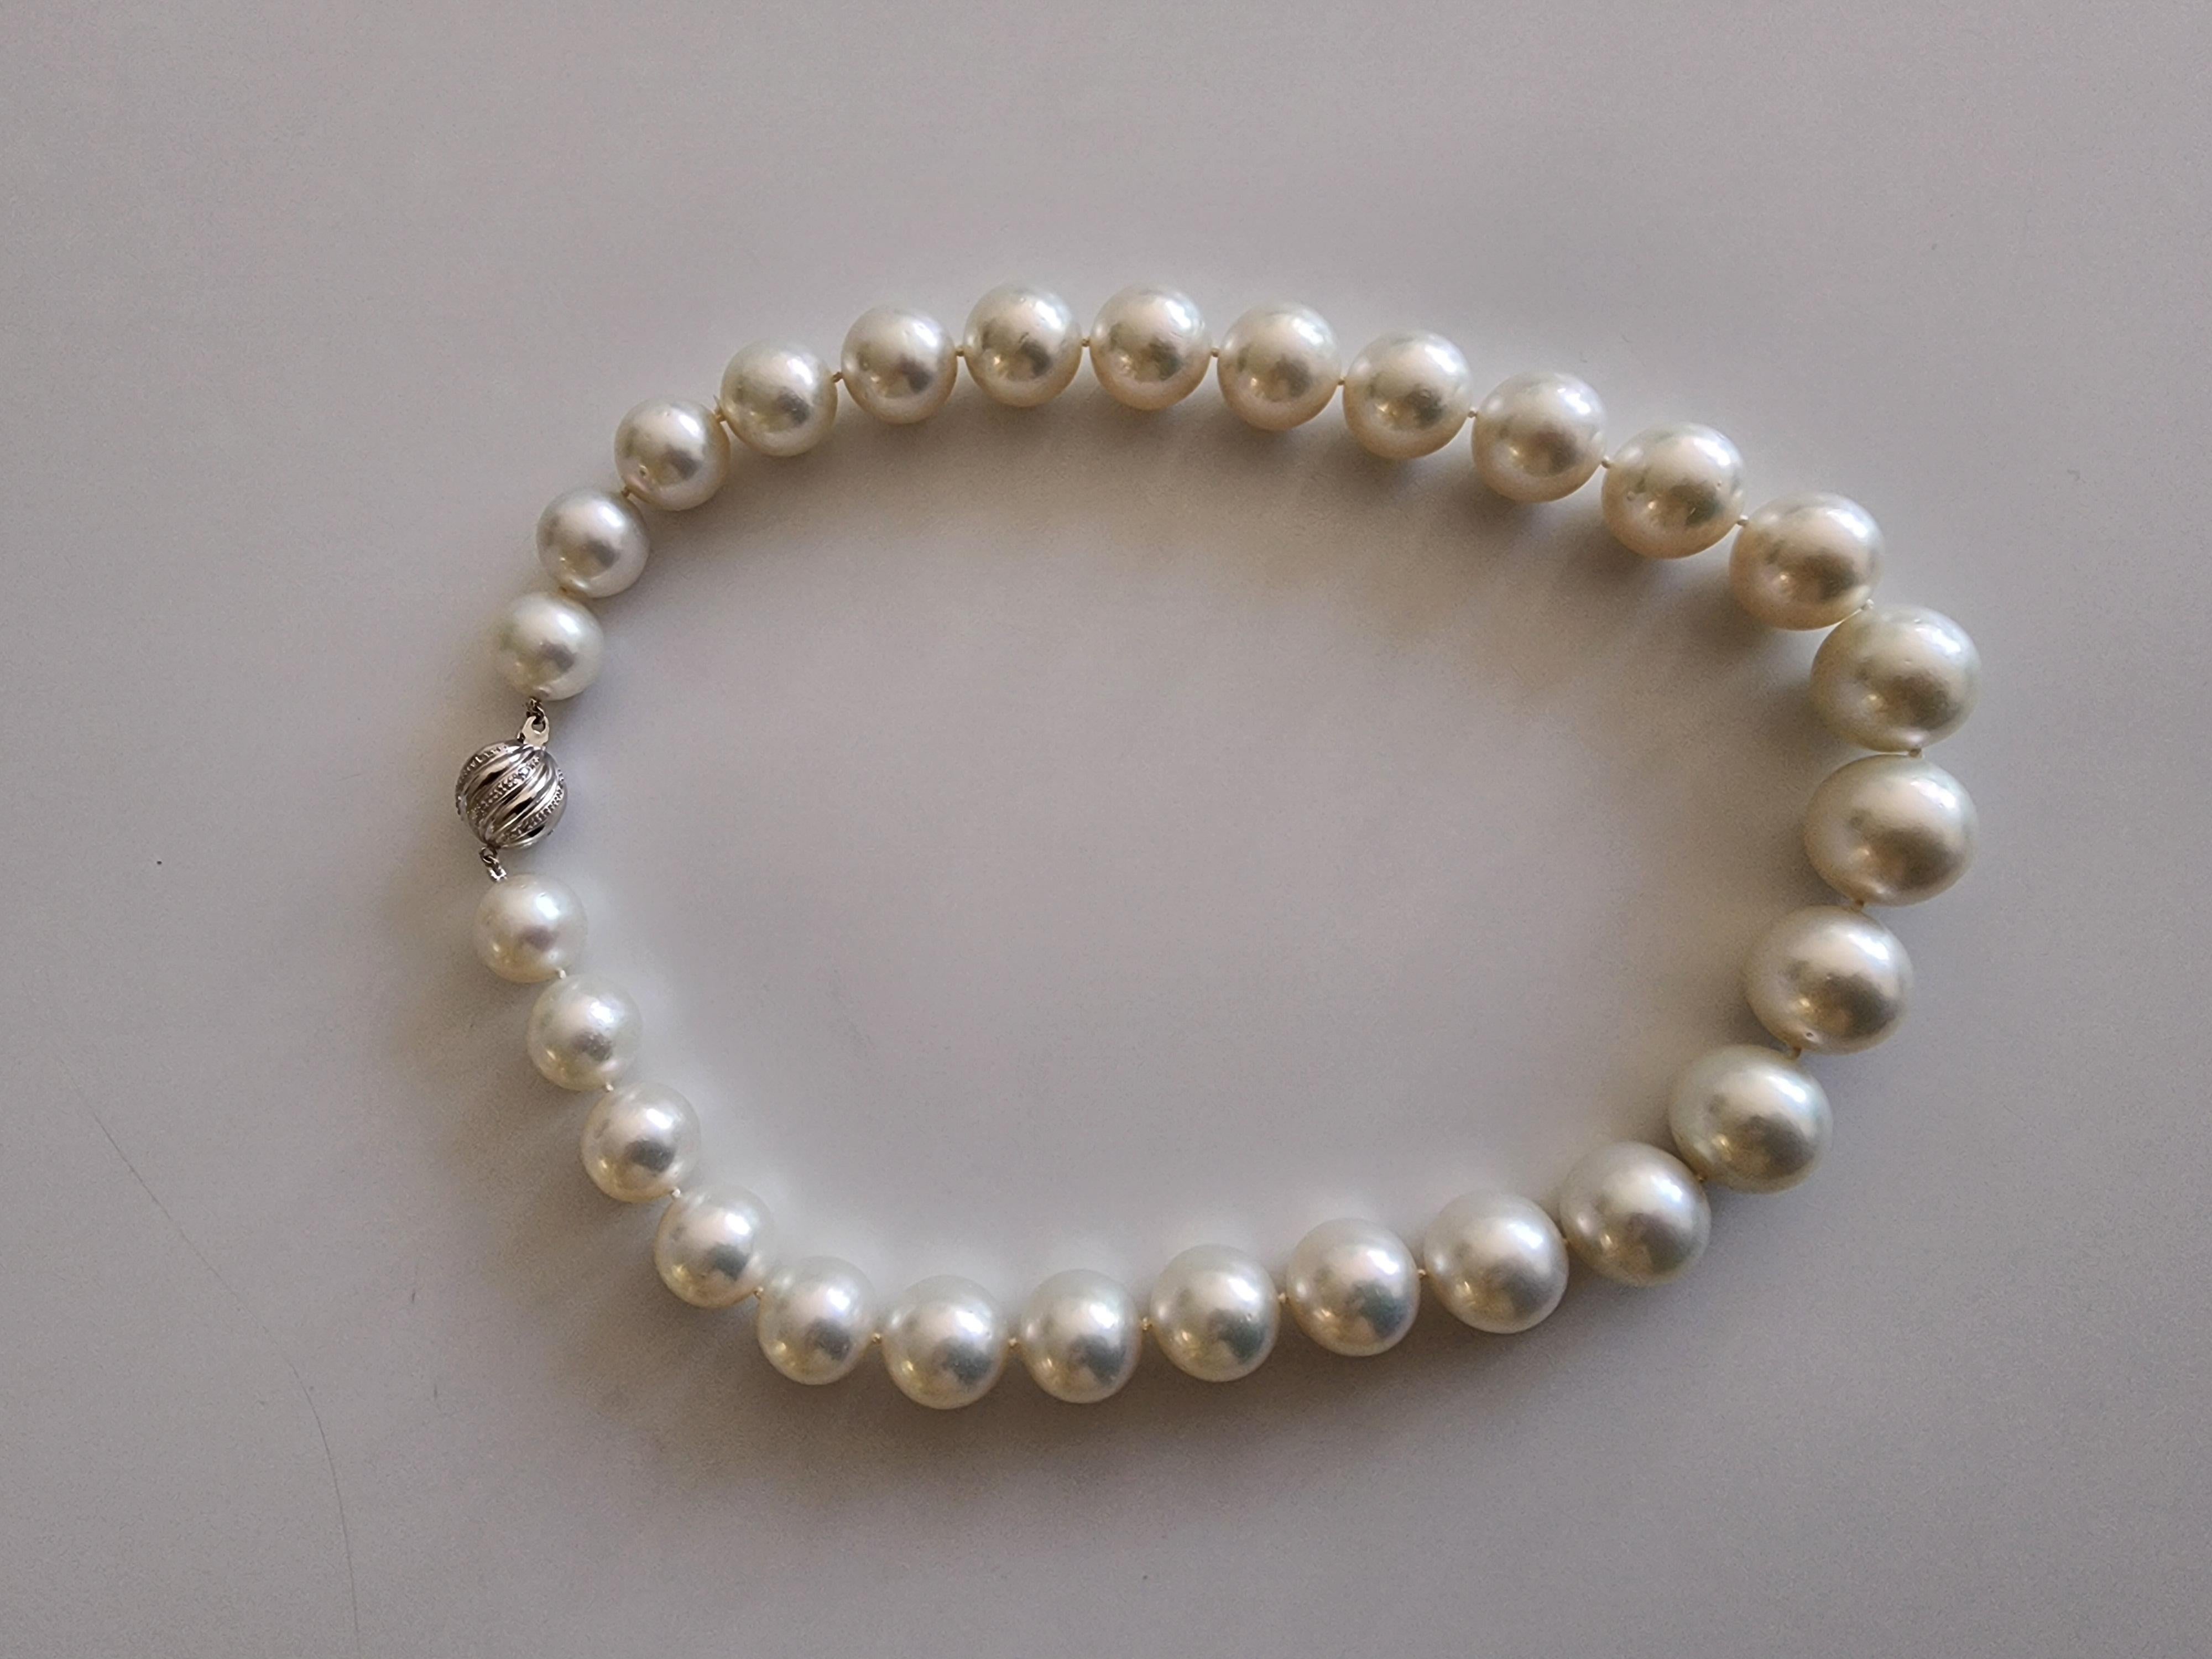 The South Sea pearl choket necklace 
27 pearls  smoothly graduated from18 mm to 14.30 mm
The lengthe of the necklace is 49 cm, the total weight is 130 gram